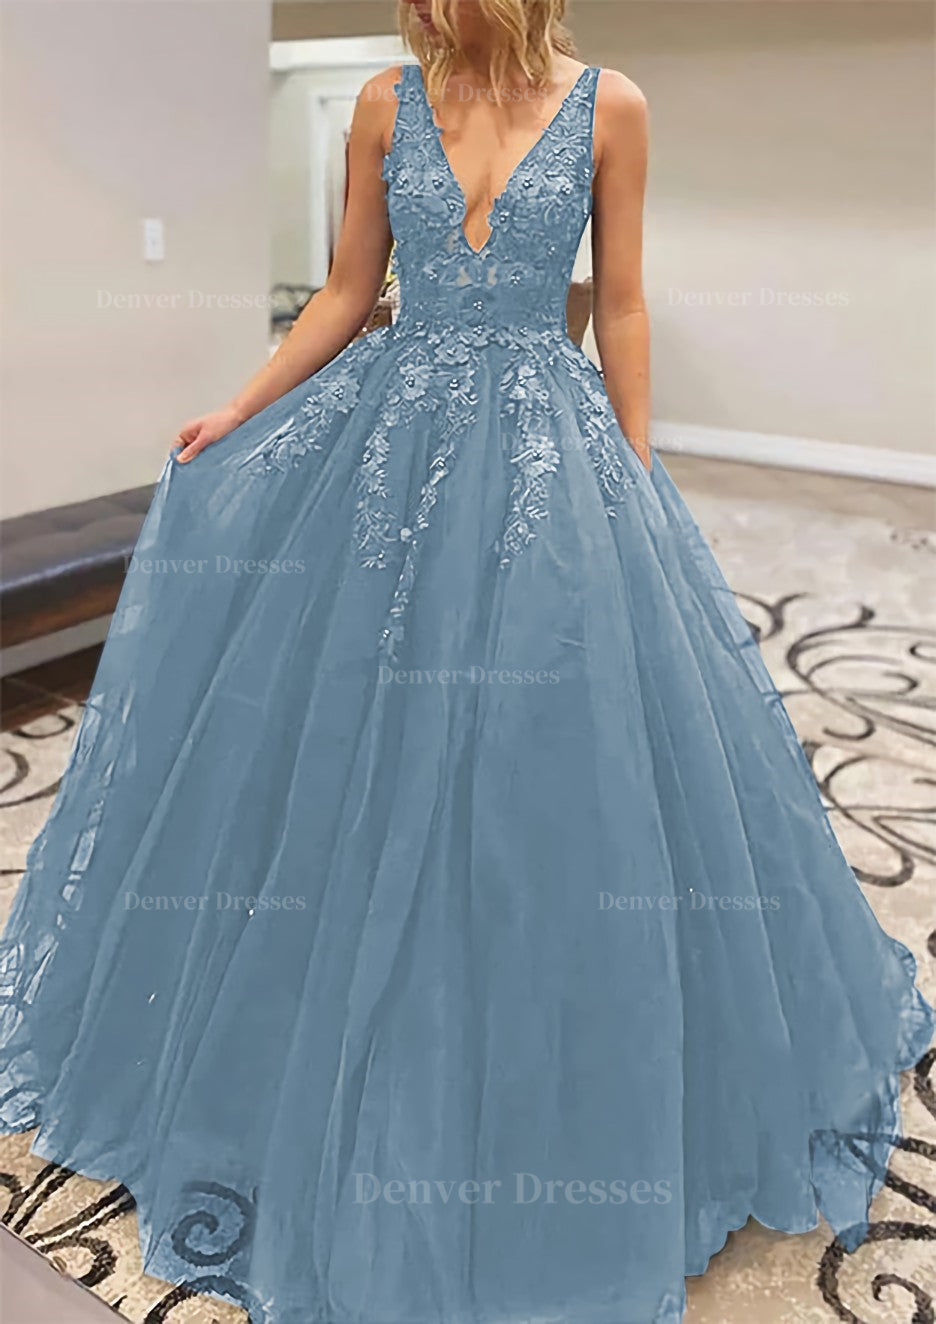 Prom Dress Inspiration, A-line V Neck Long/Floor-Length Lace Tulle Prom Dress With Appliqued